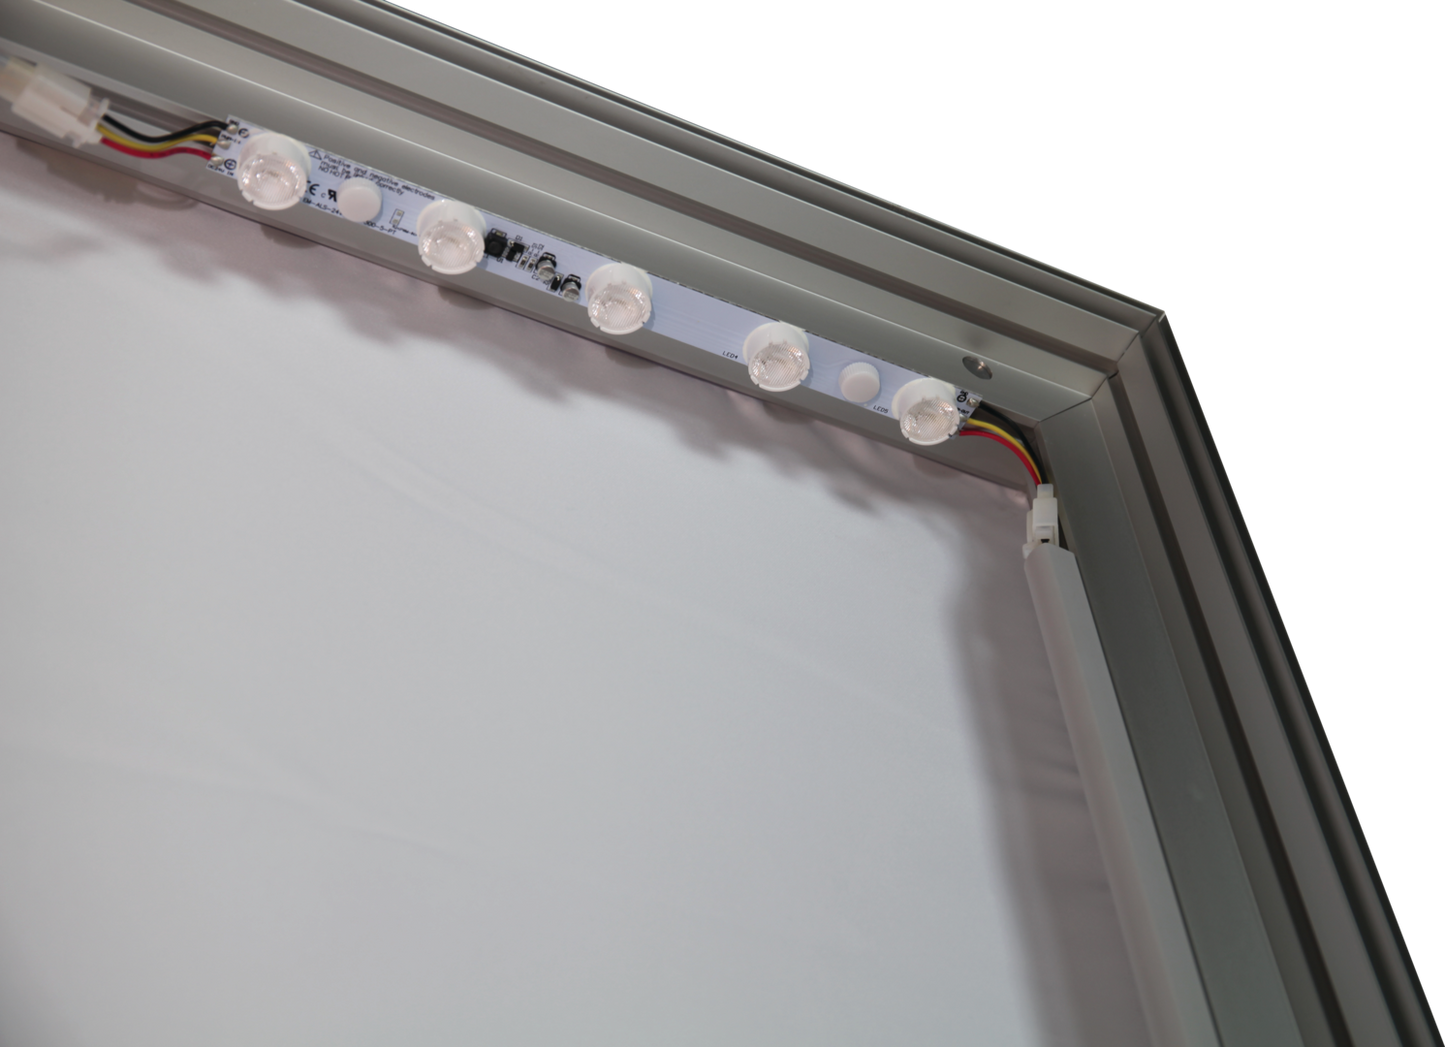 10ft x 4ft Vector Frame Hanging Light Box Single-Sided (Graphic Only)